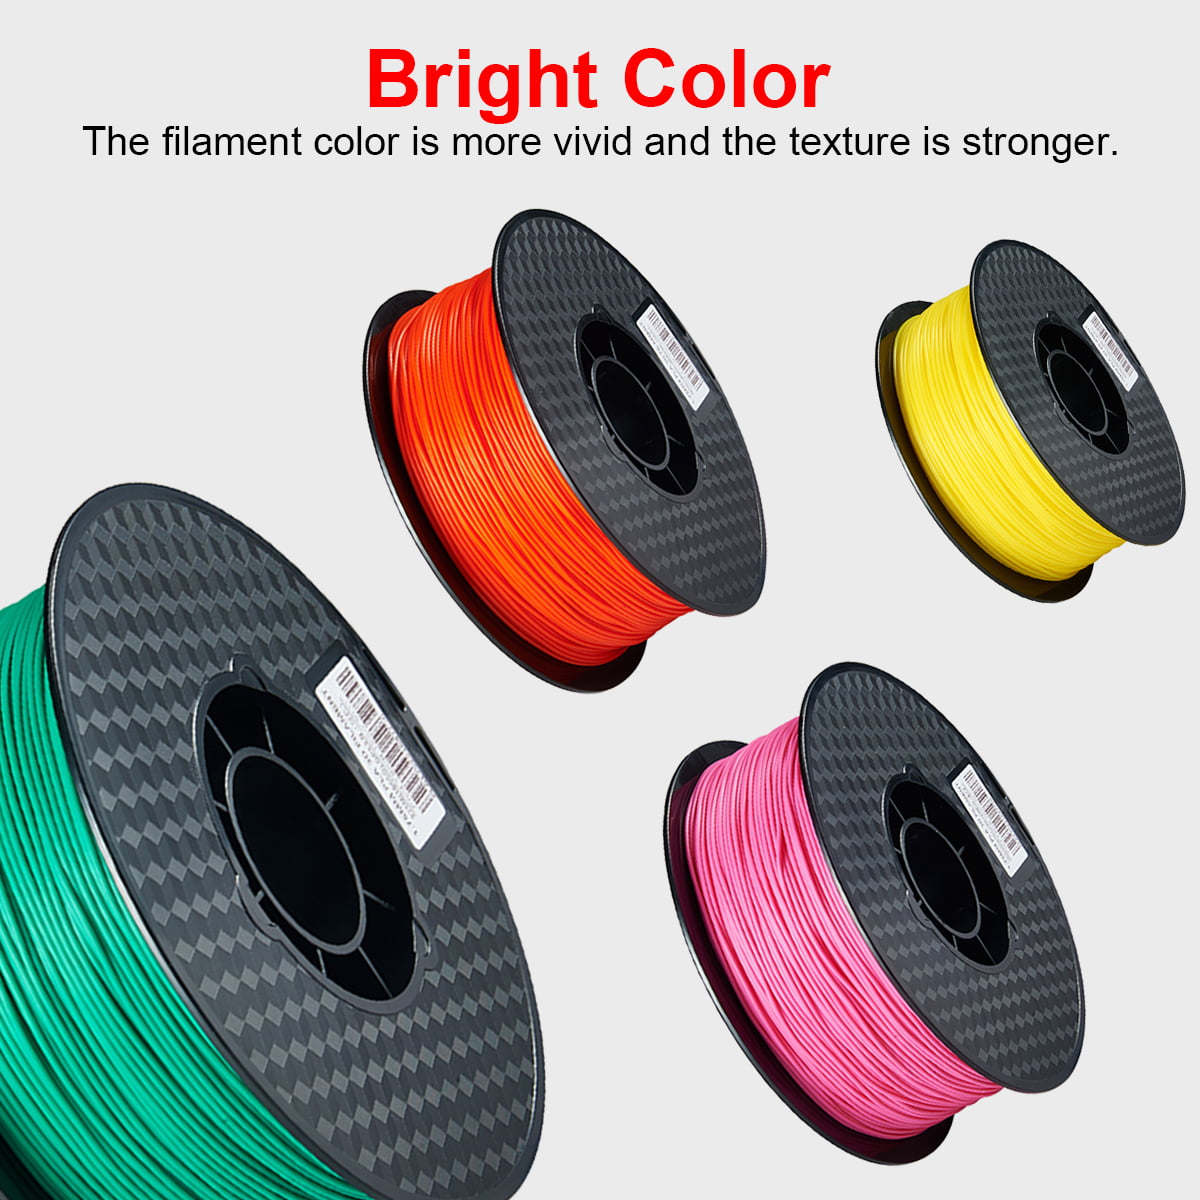 1KG Spool 2.2LBS Dimensional Accuracy +/- 0.05 mm Color Changing with Temperature 3D Printer PLA Filament,from Orange to Yellow,1.75 mm 3D Printing PLA Material